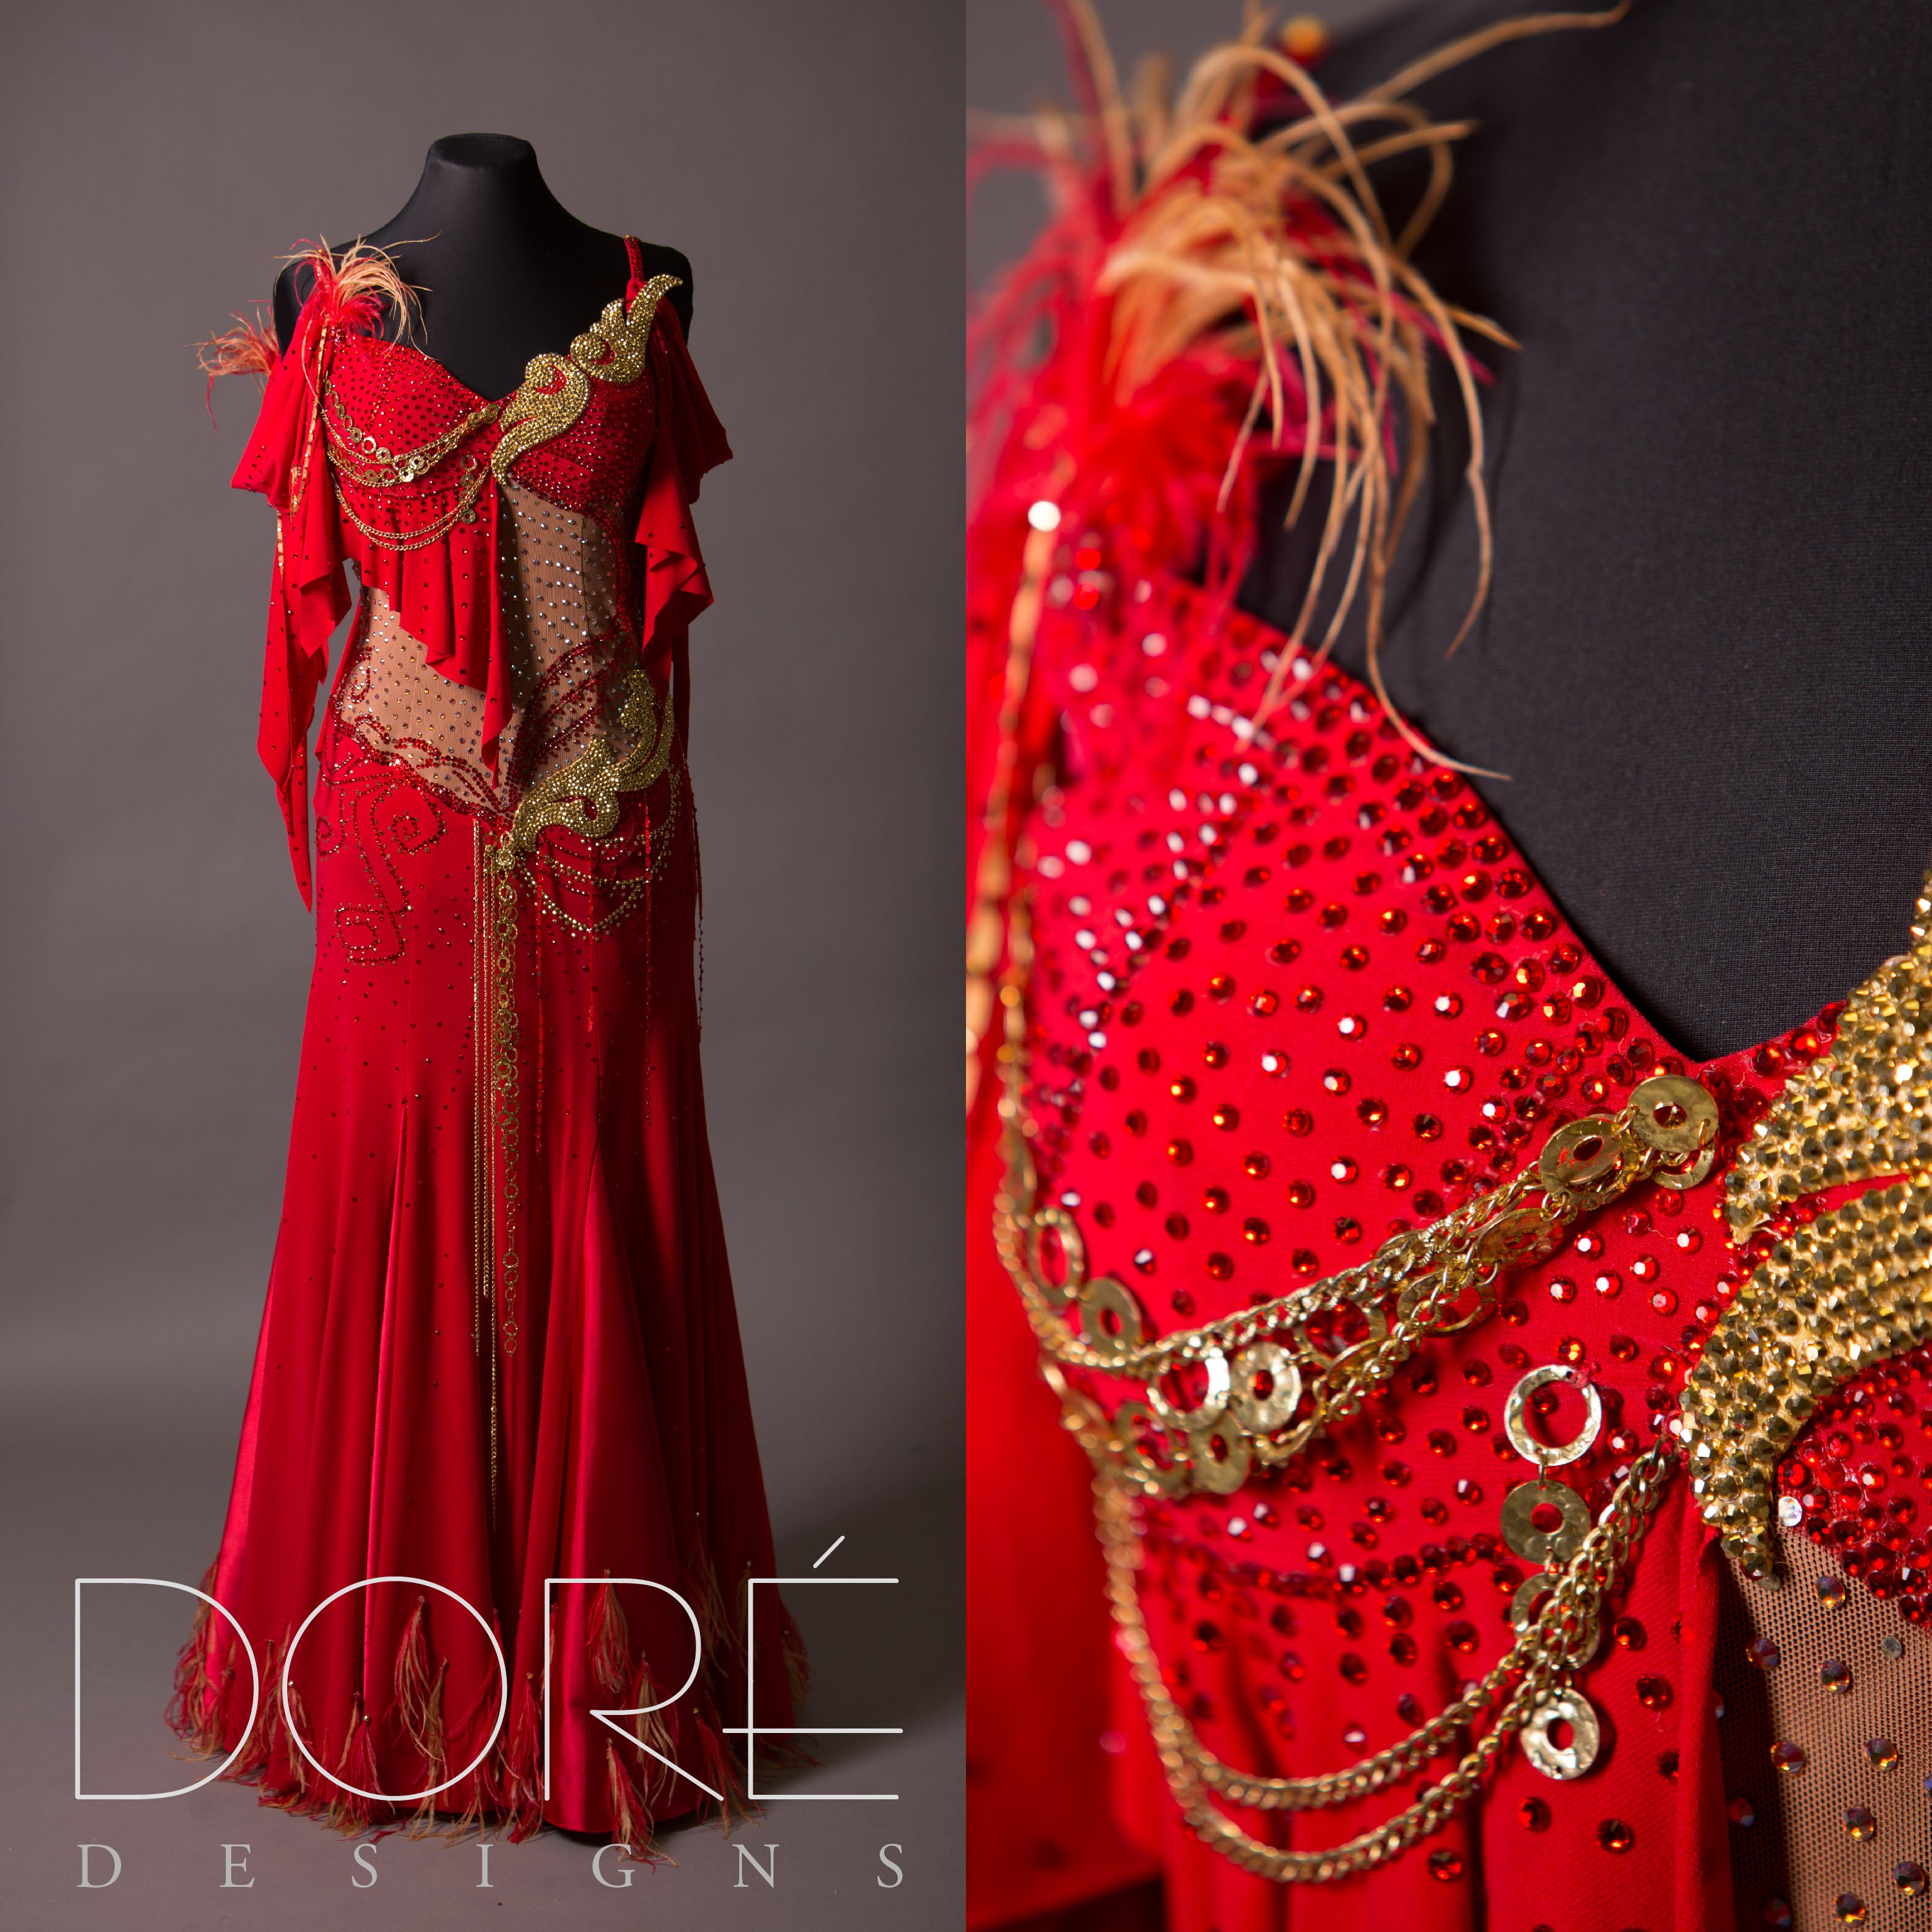 Nude & Red Smooth w/ Gold Chains & Feather Trim Godets | Ballroom ...